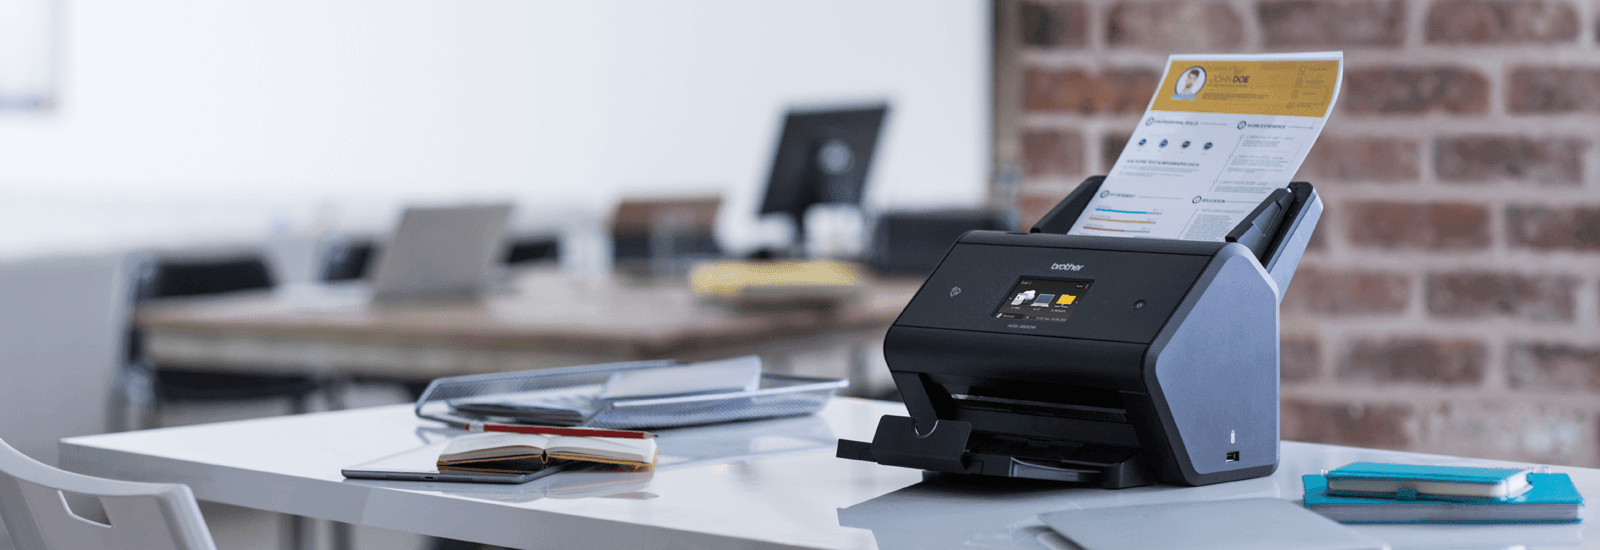 10 Reasons why desktop scanners are good for business